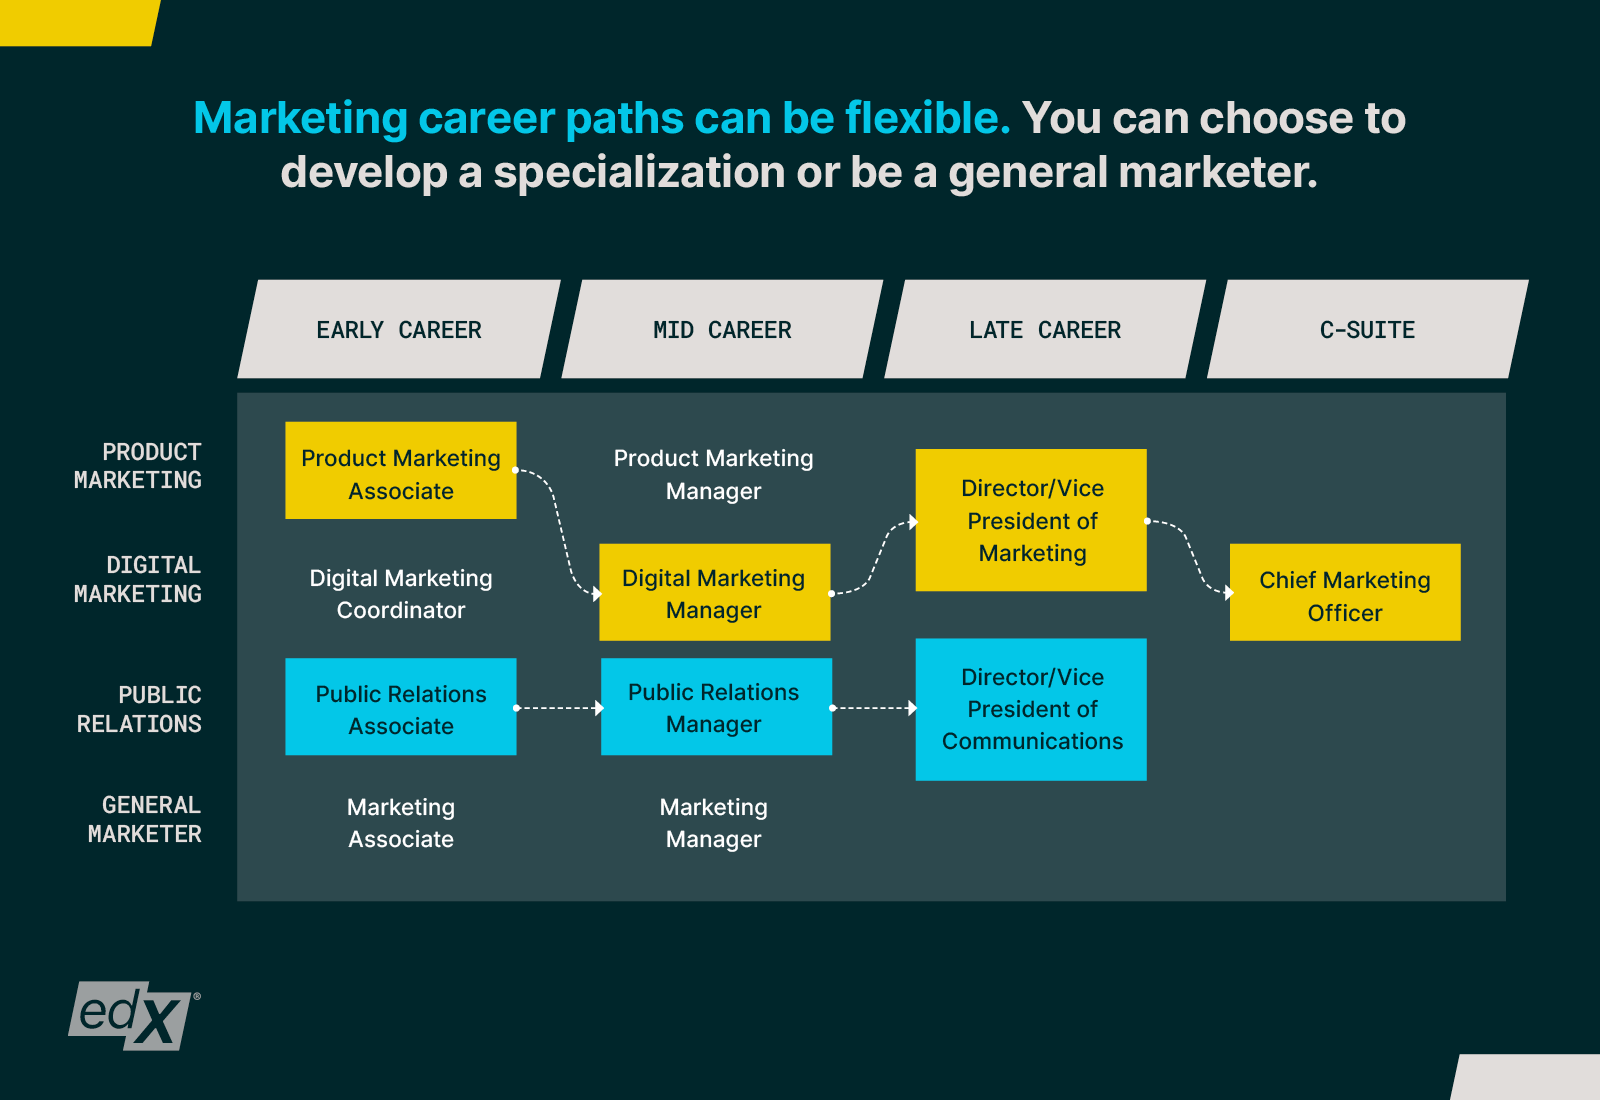 Marketing-Career-Guide_Graph-2_1600x800.png